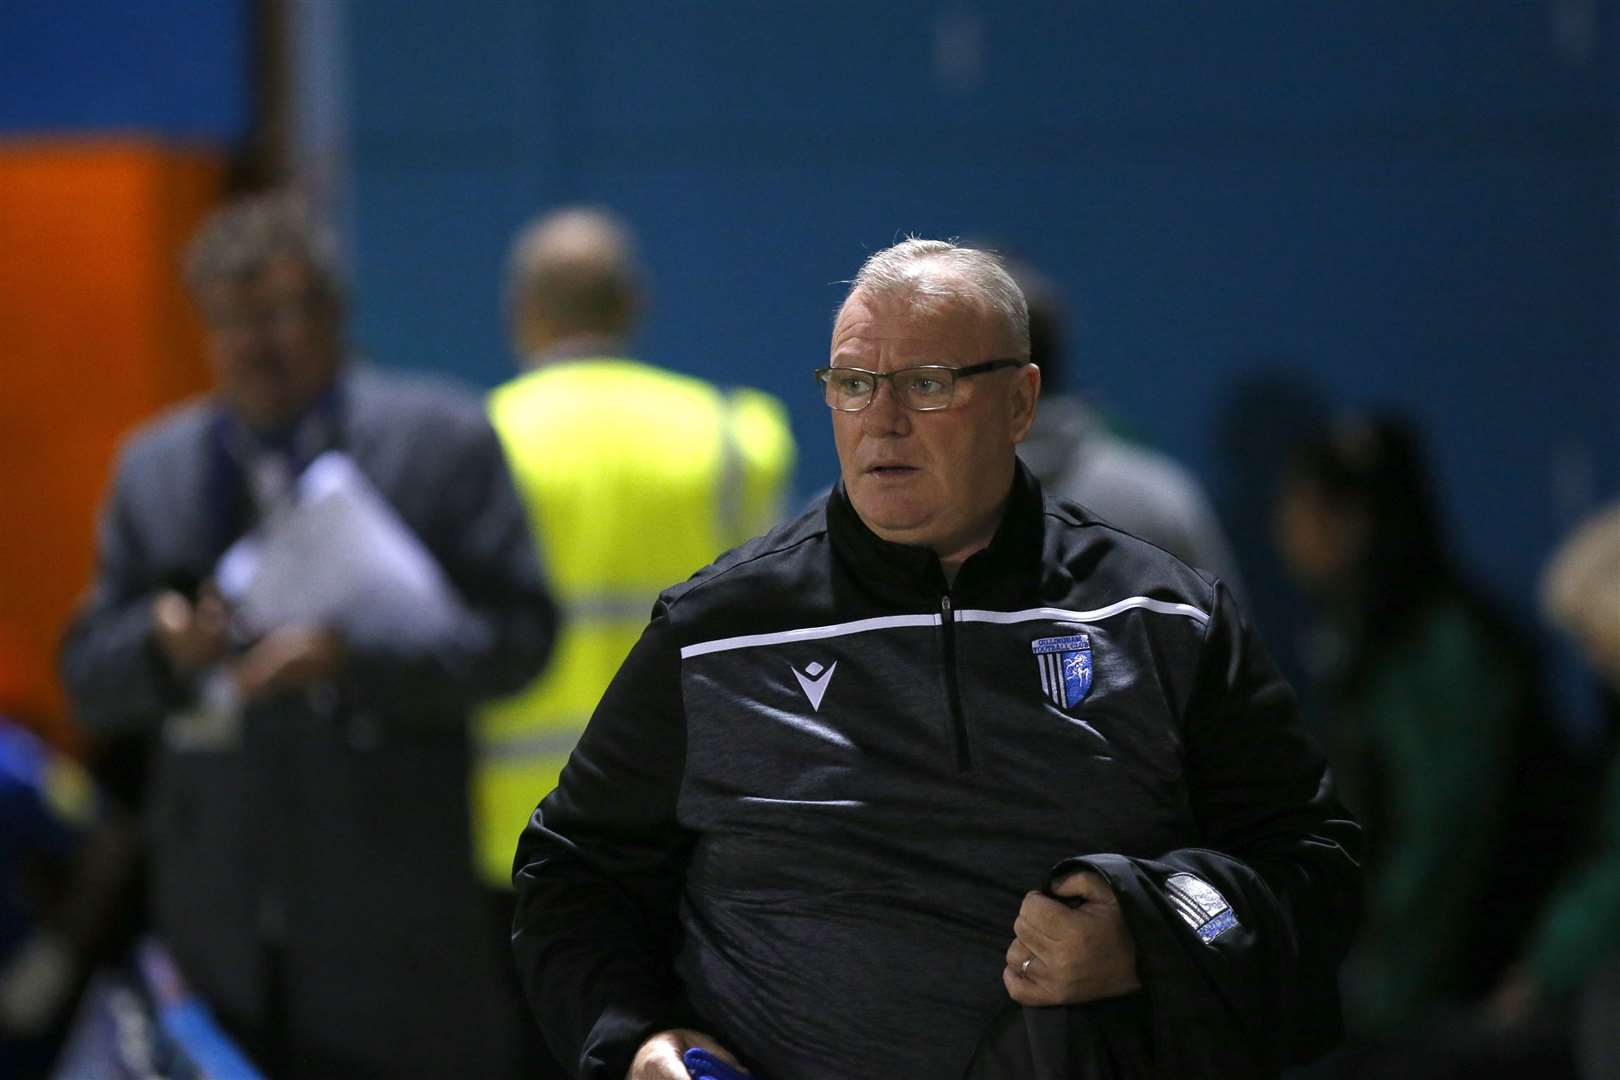 Gillingham manager Steve Evans looking forward to putting a tough year behind him